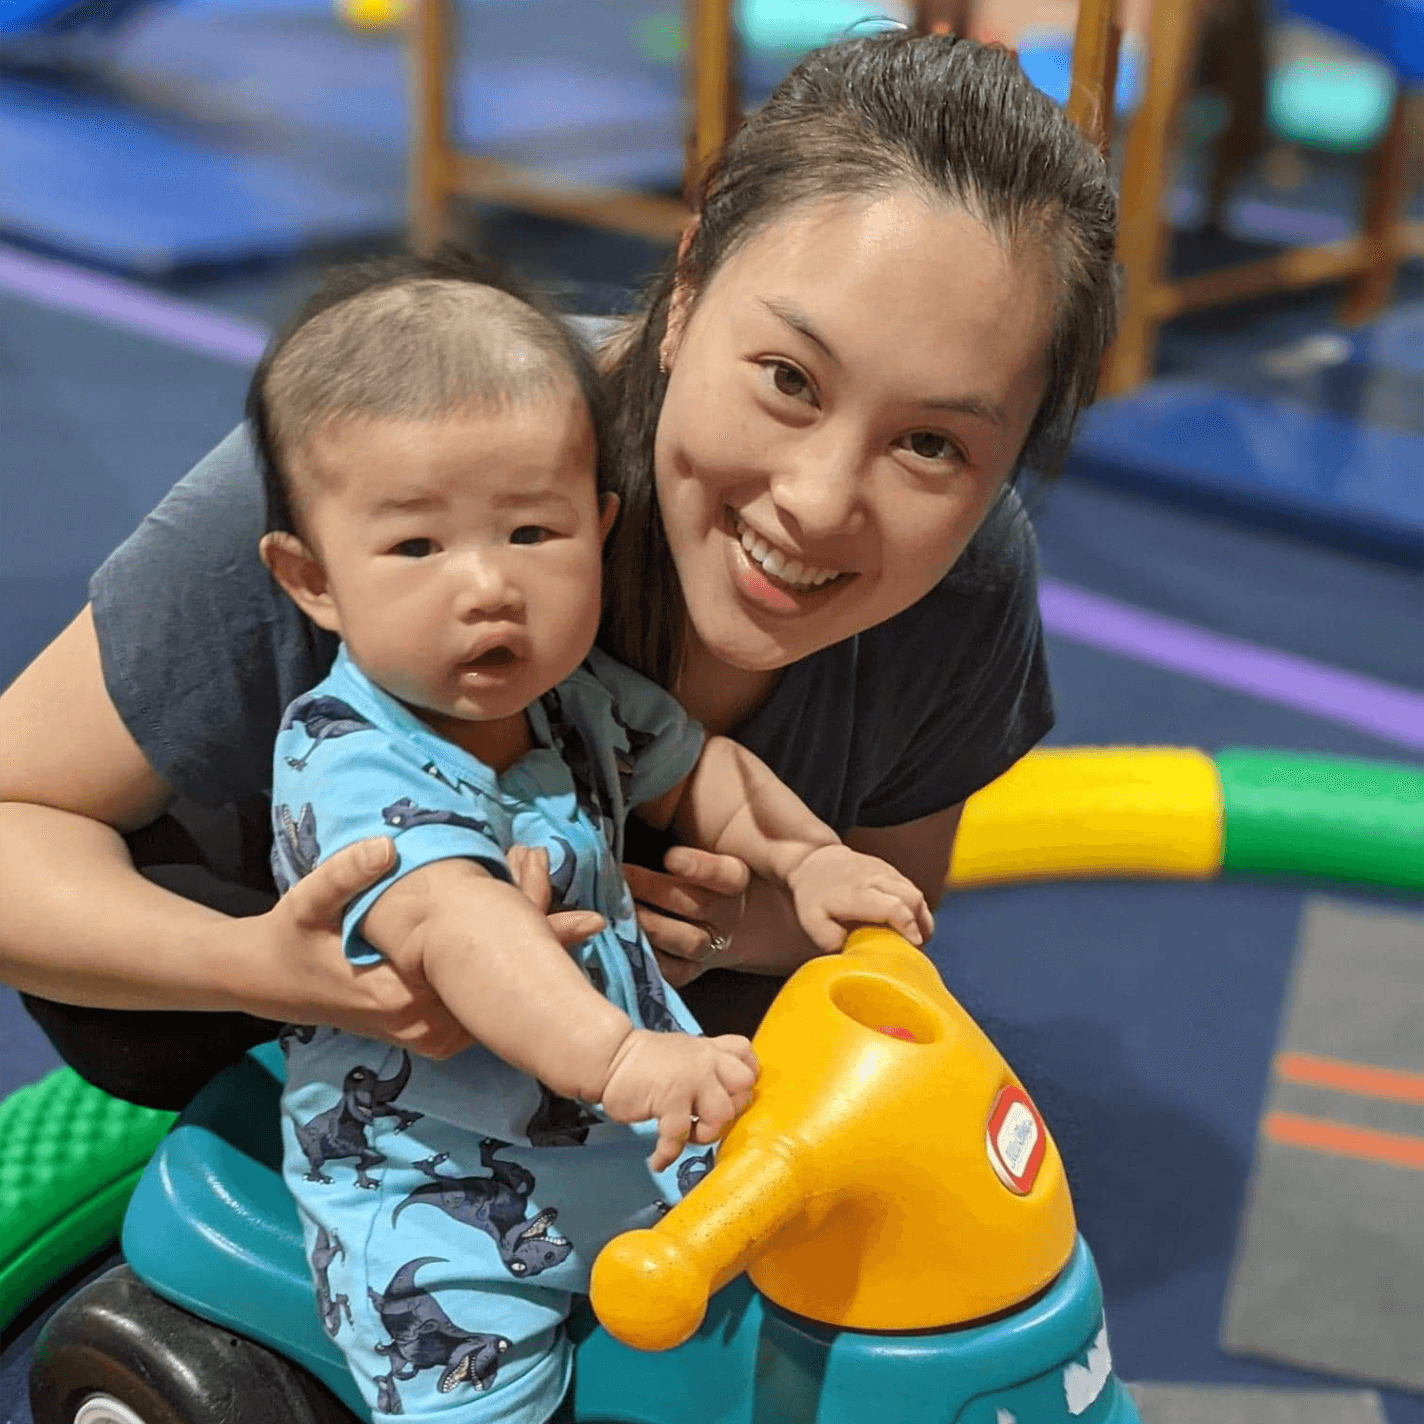 A mother holding her baby and smiling at a KinderGym